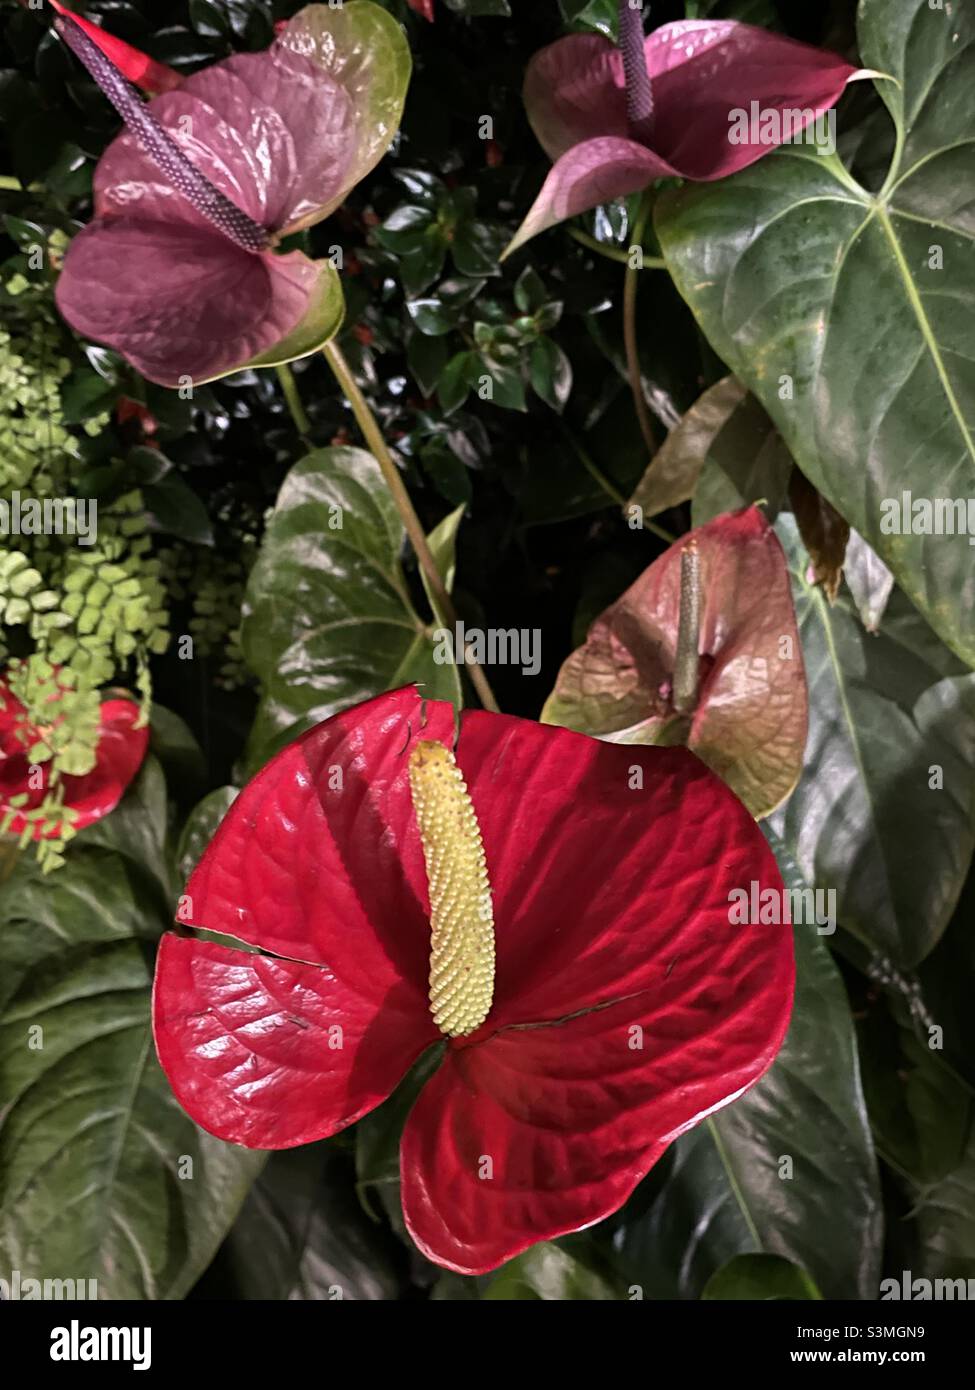 Red anthurium plants with yellow stalk in a garden Stock Photo